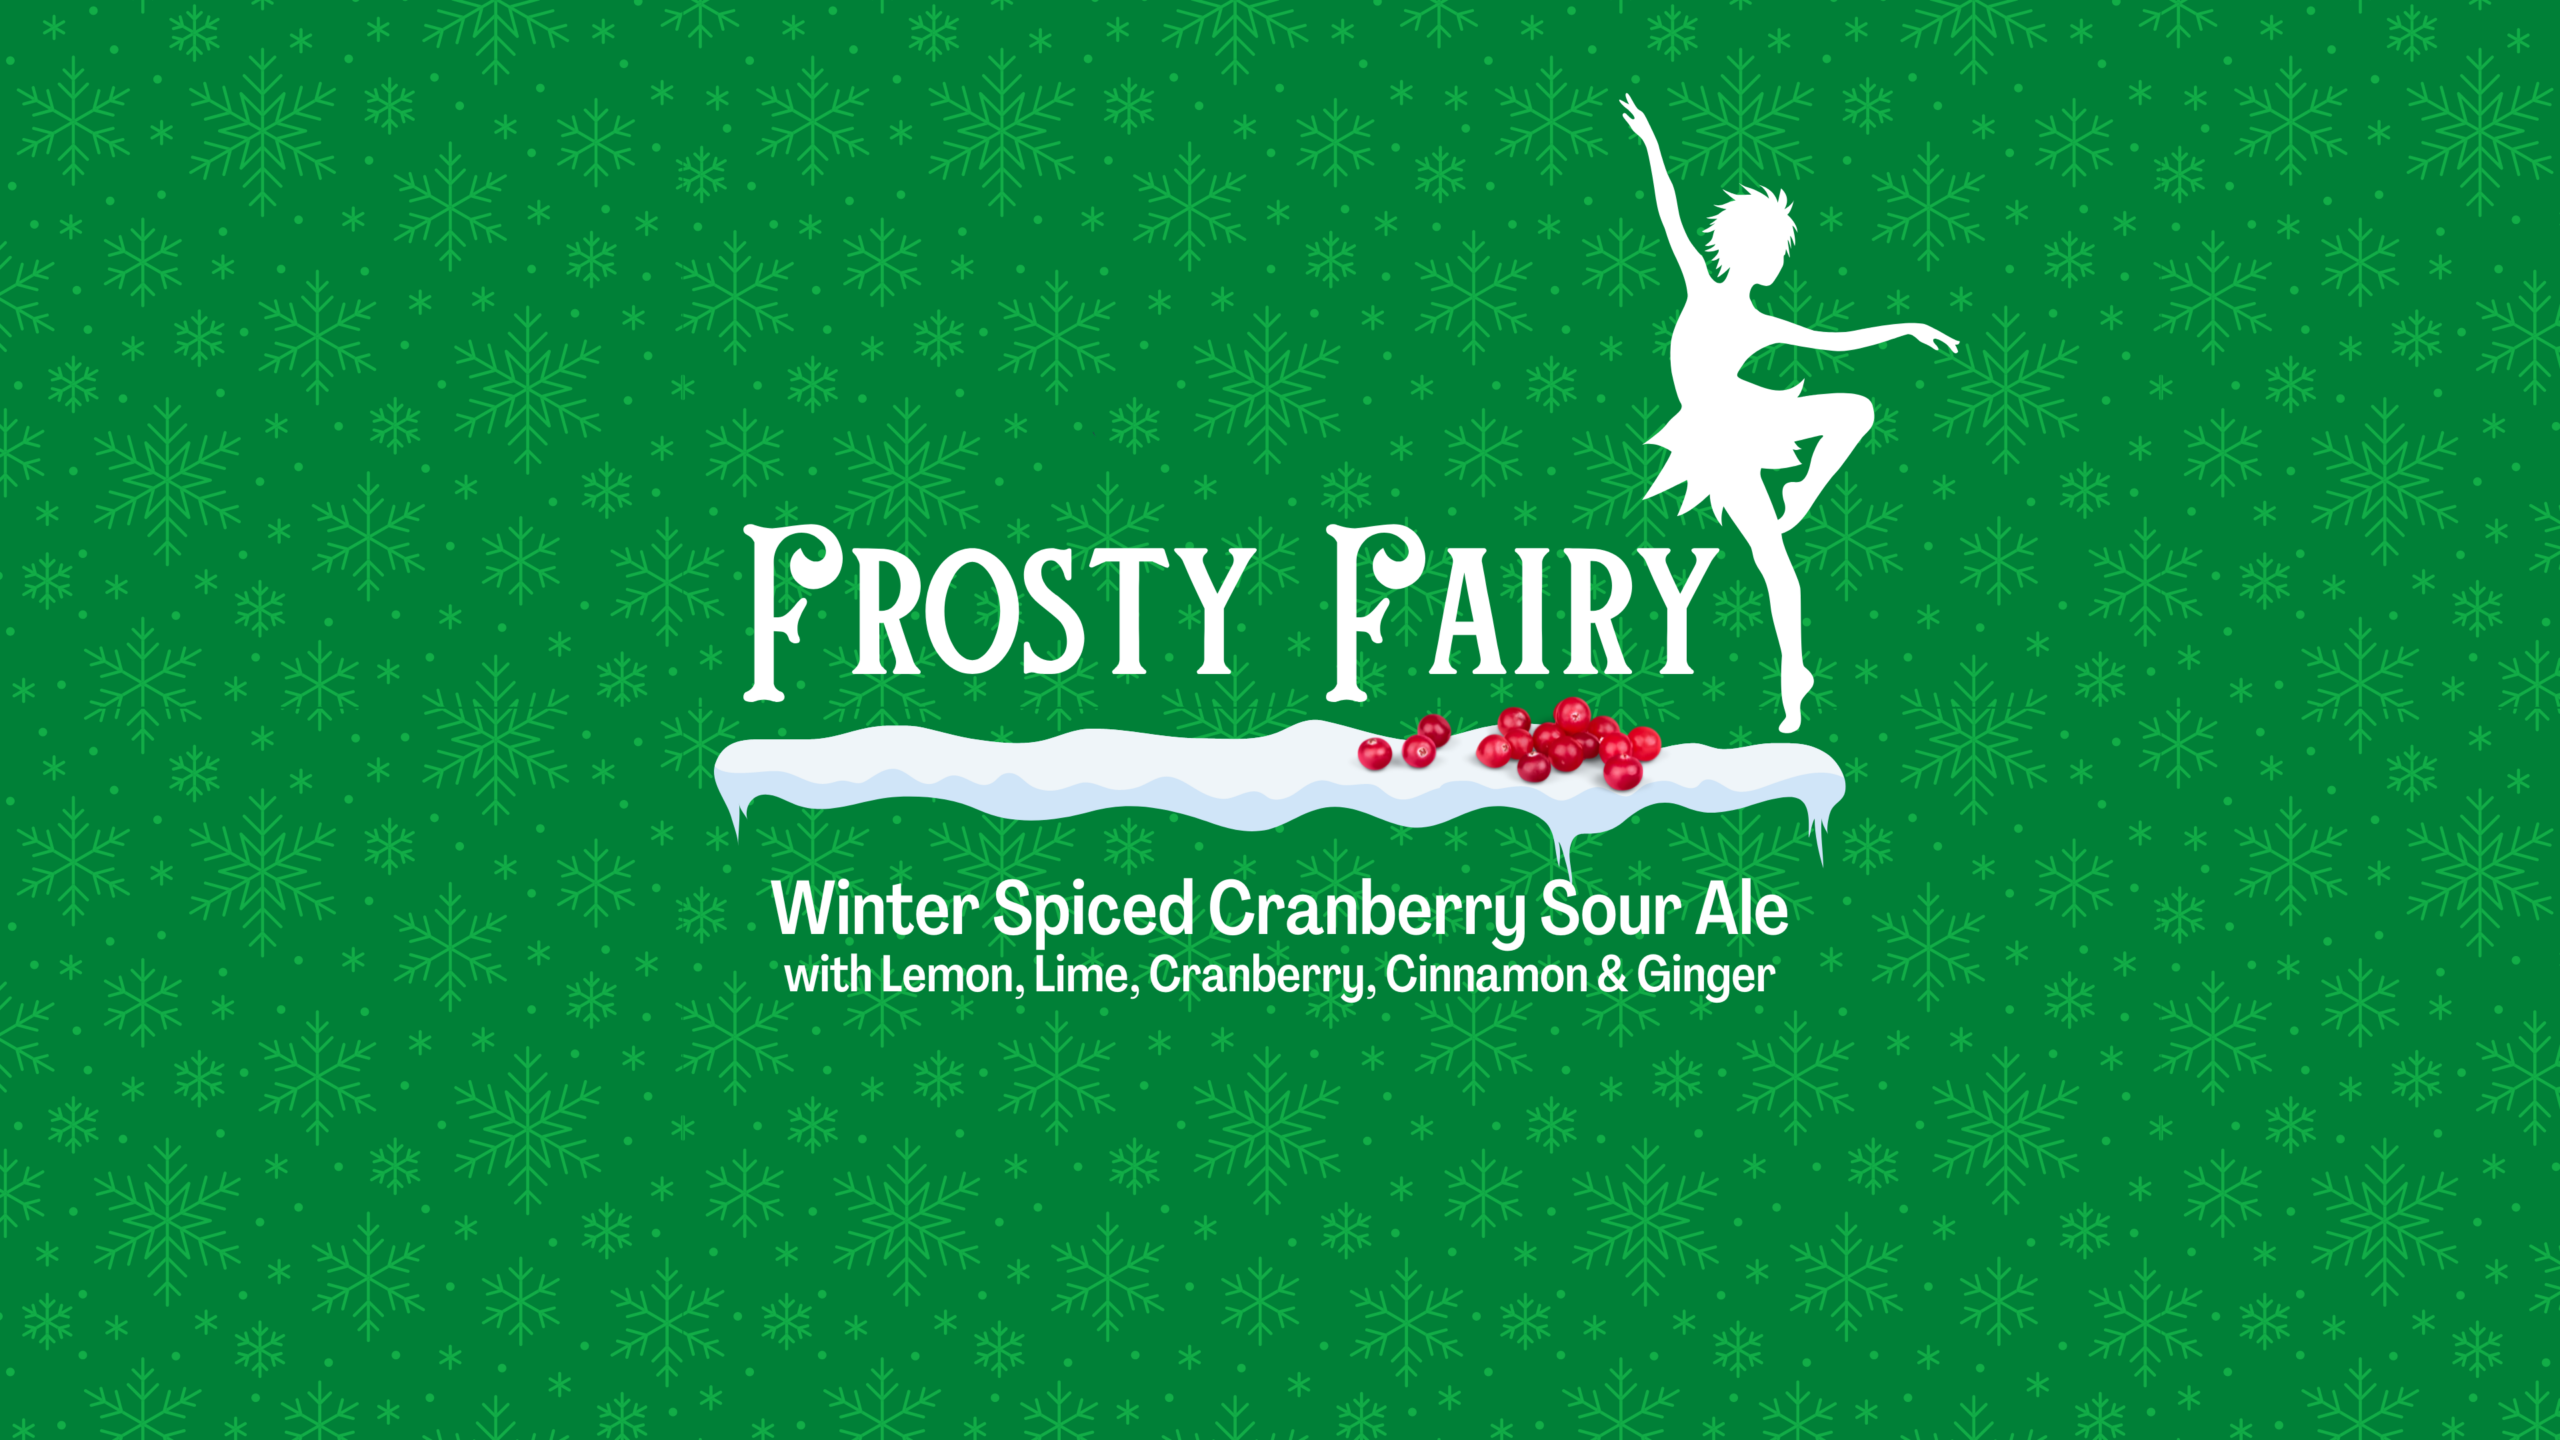 Frosty Fairy Winter Spiced Cranberry Sour Release at On Rotation